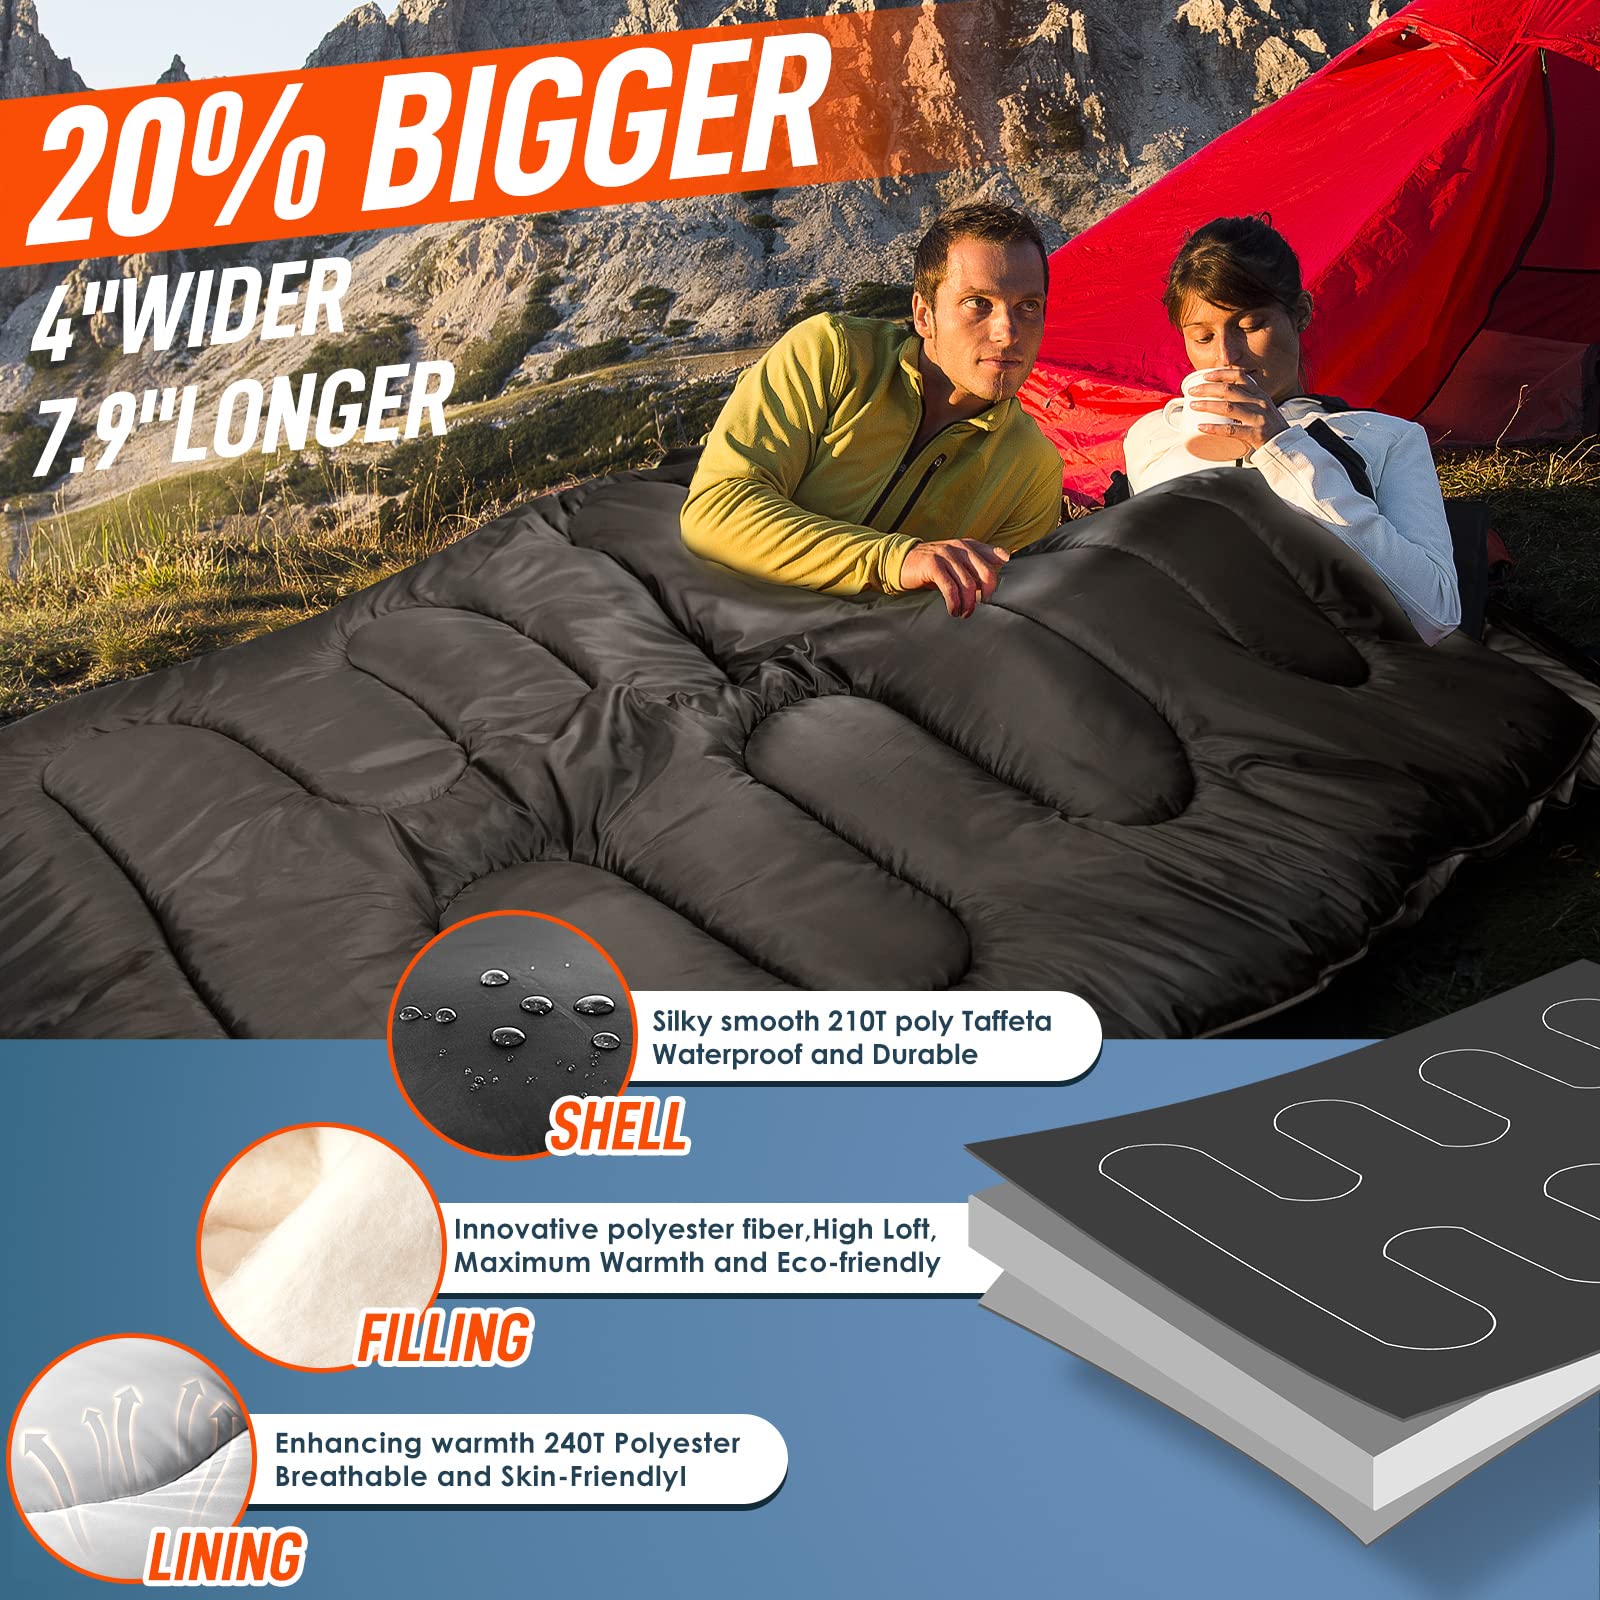 Sleepingo Double Sleeping Bag for Backpacking, Camping, Or Hiking. Queen  Size XL! Cold Weather 2 Person Waterproof Sleeping Bag for Adults Or Teens.  Truck, Tent, Or Sleeping Pad, Lightweight - Walmart.com